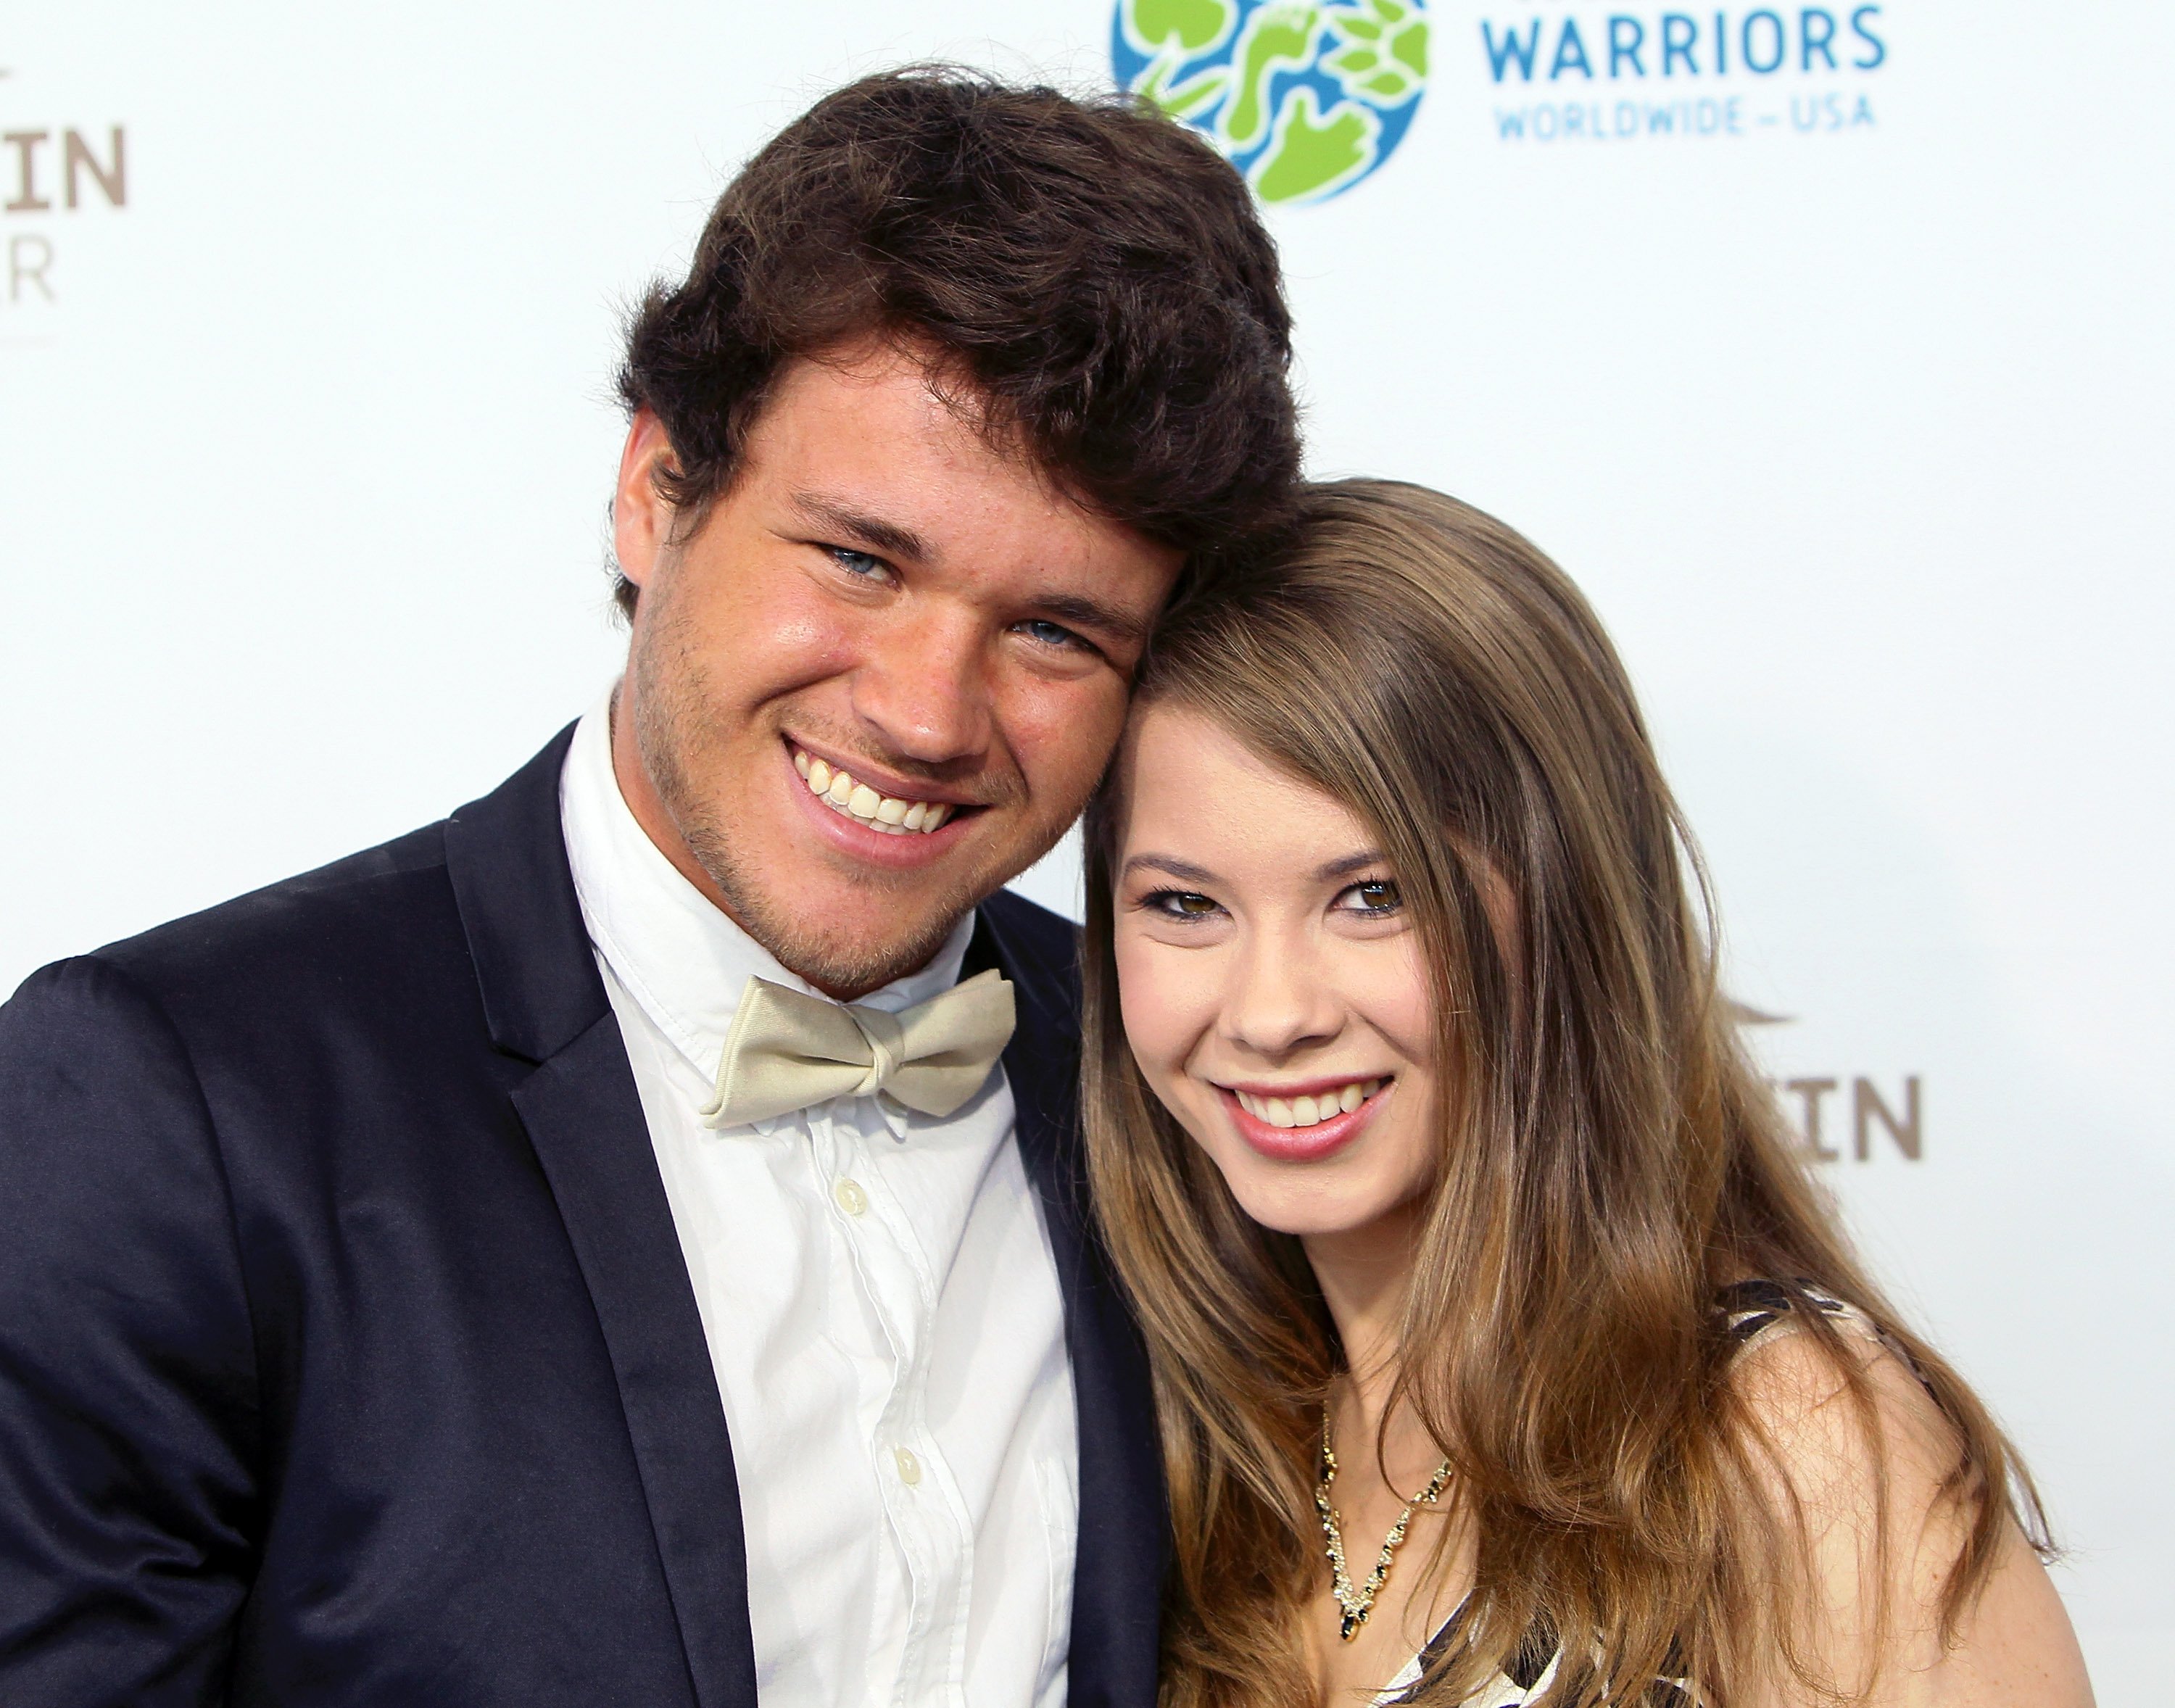 Chandler Powell and TV personality Bindi Irwin attend the Steve Irwin Gala Dinner at JW Marriott Los Angeles | Source: Getty images